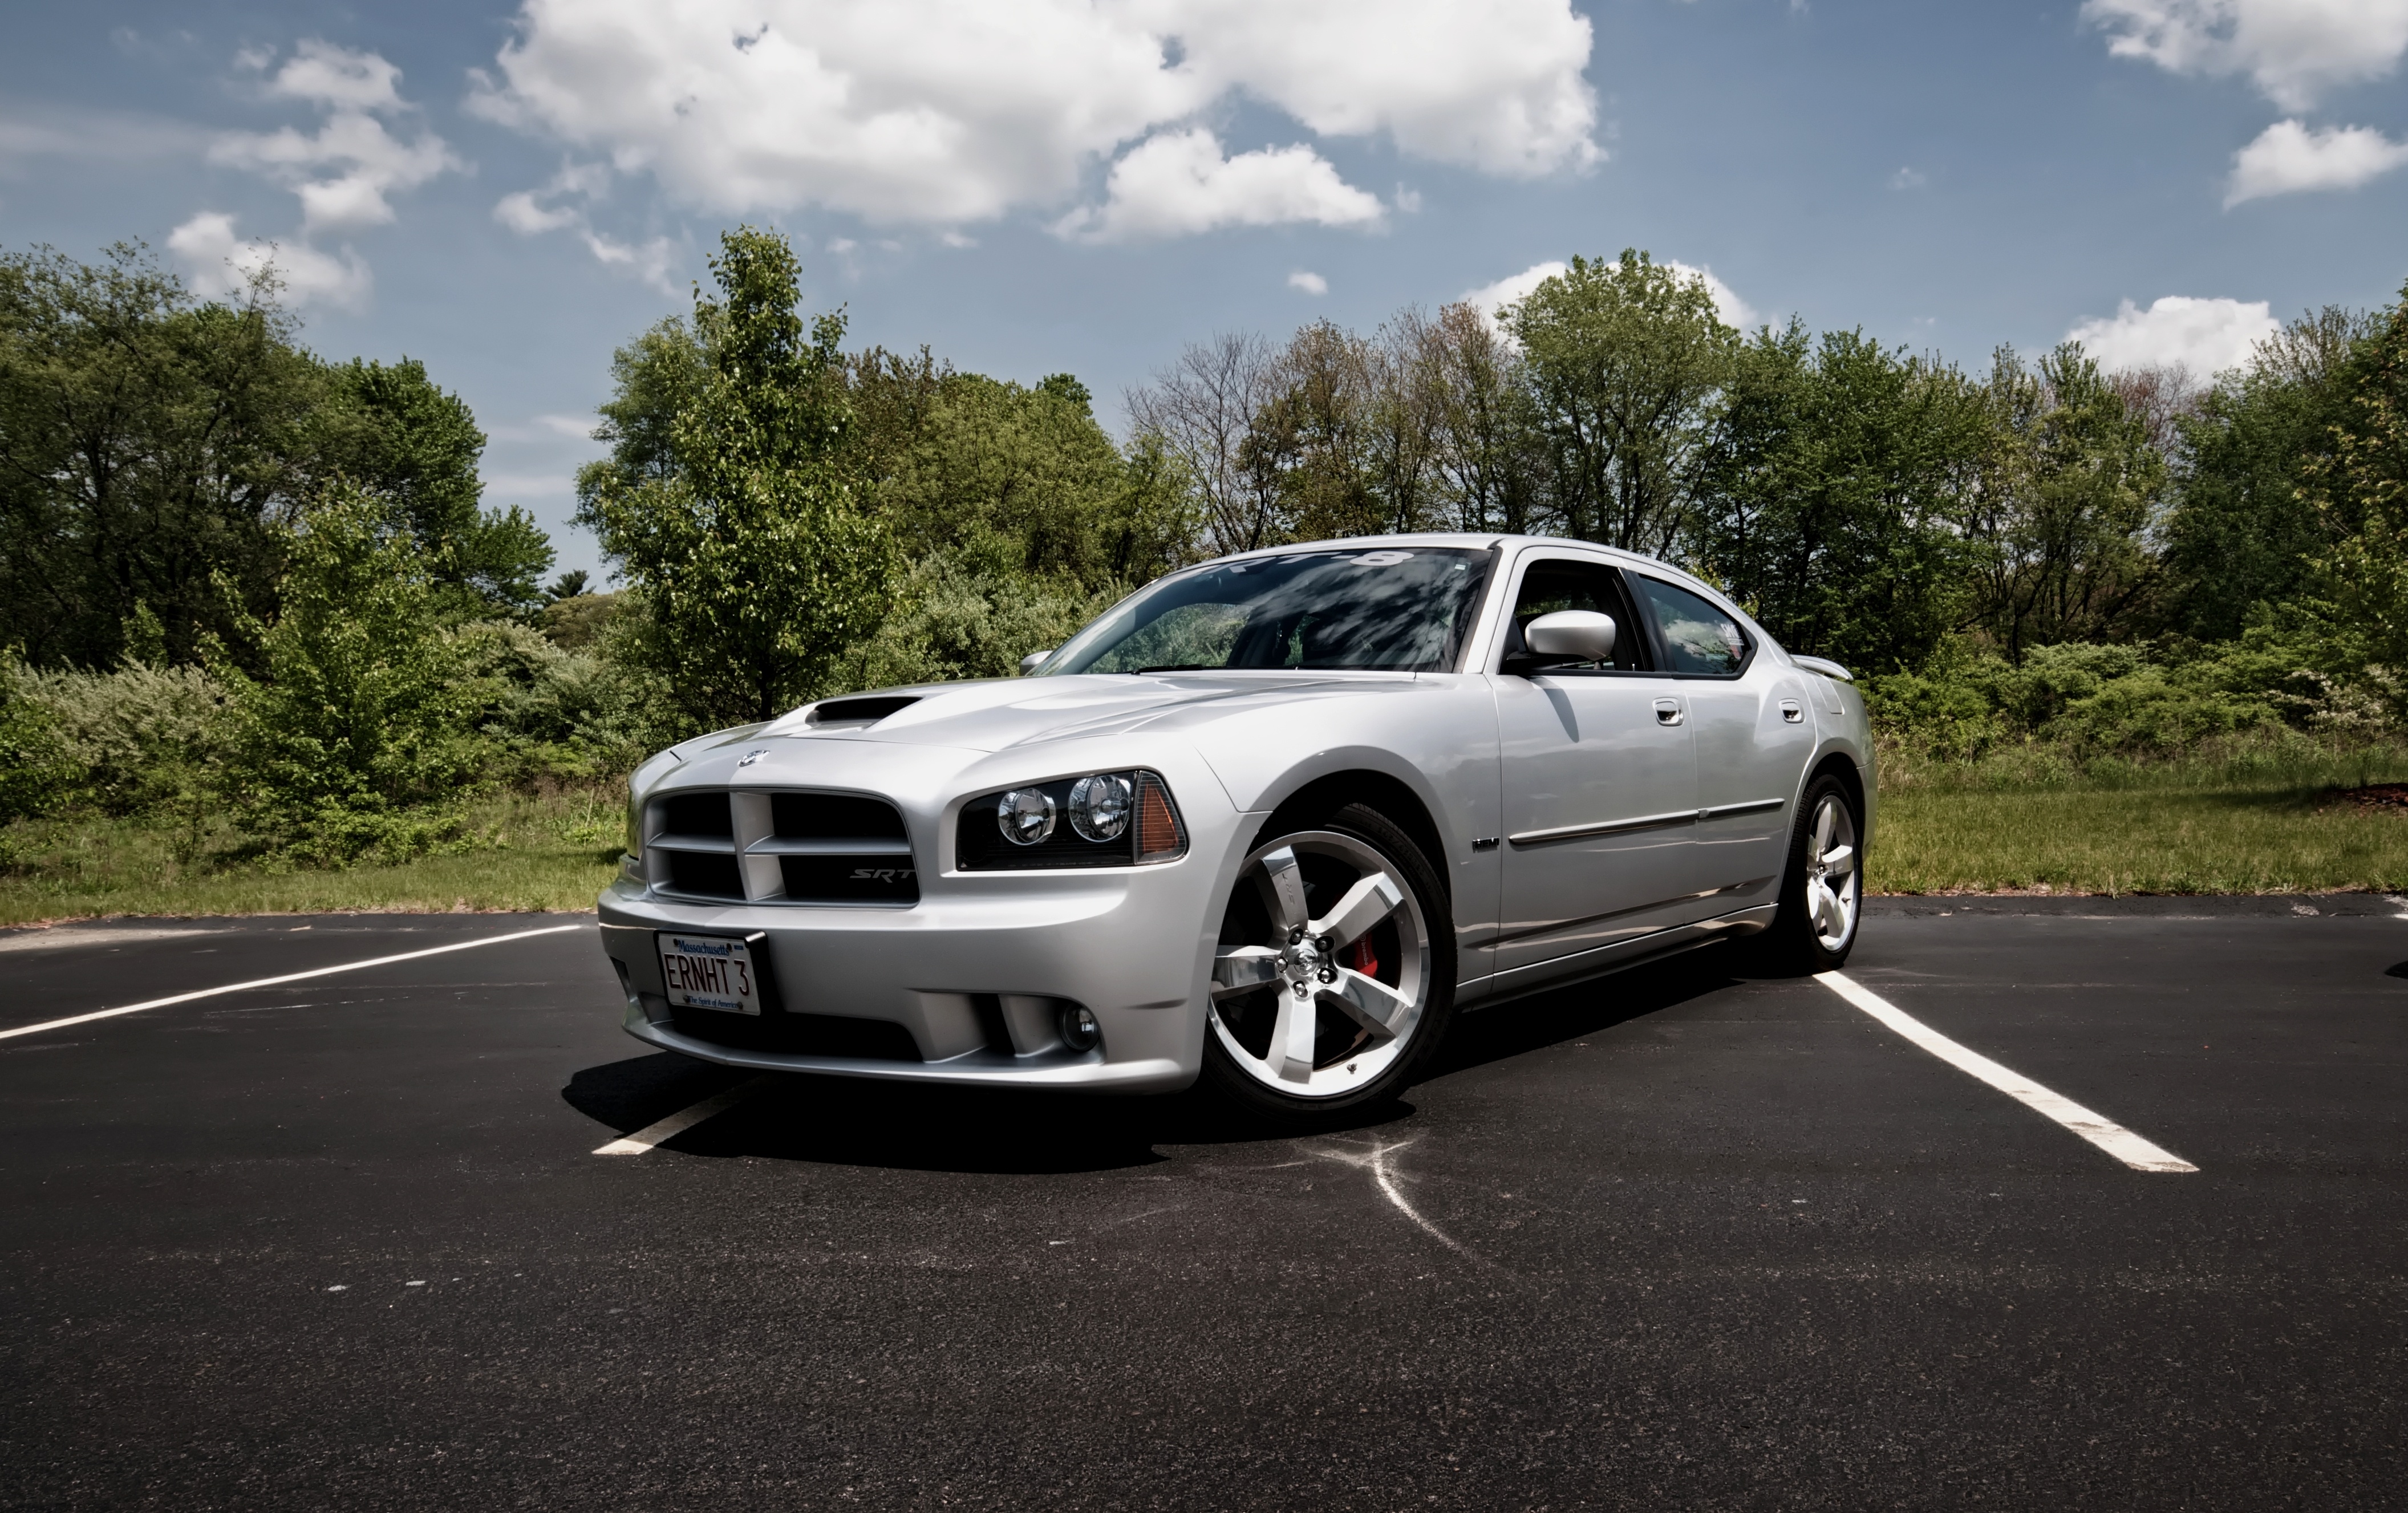 supercar, tuning, cars, silver, dodge charger srt8, cult car, functional hood